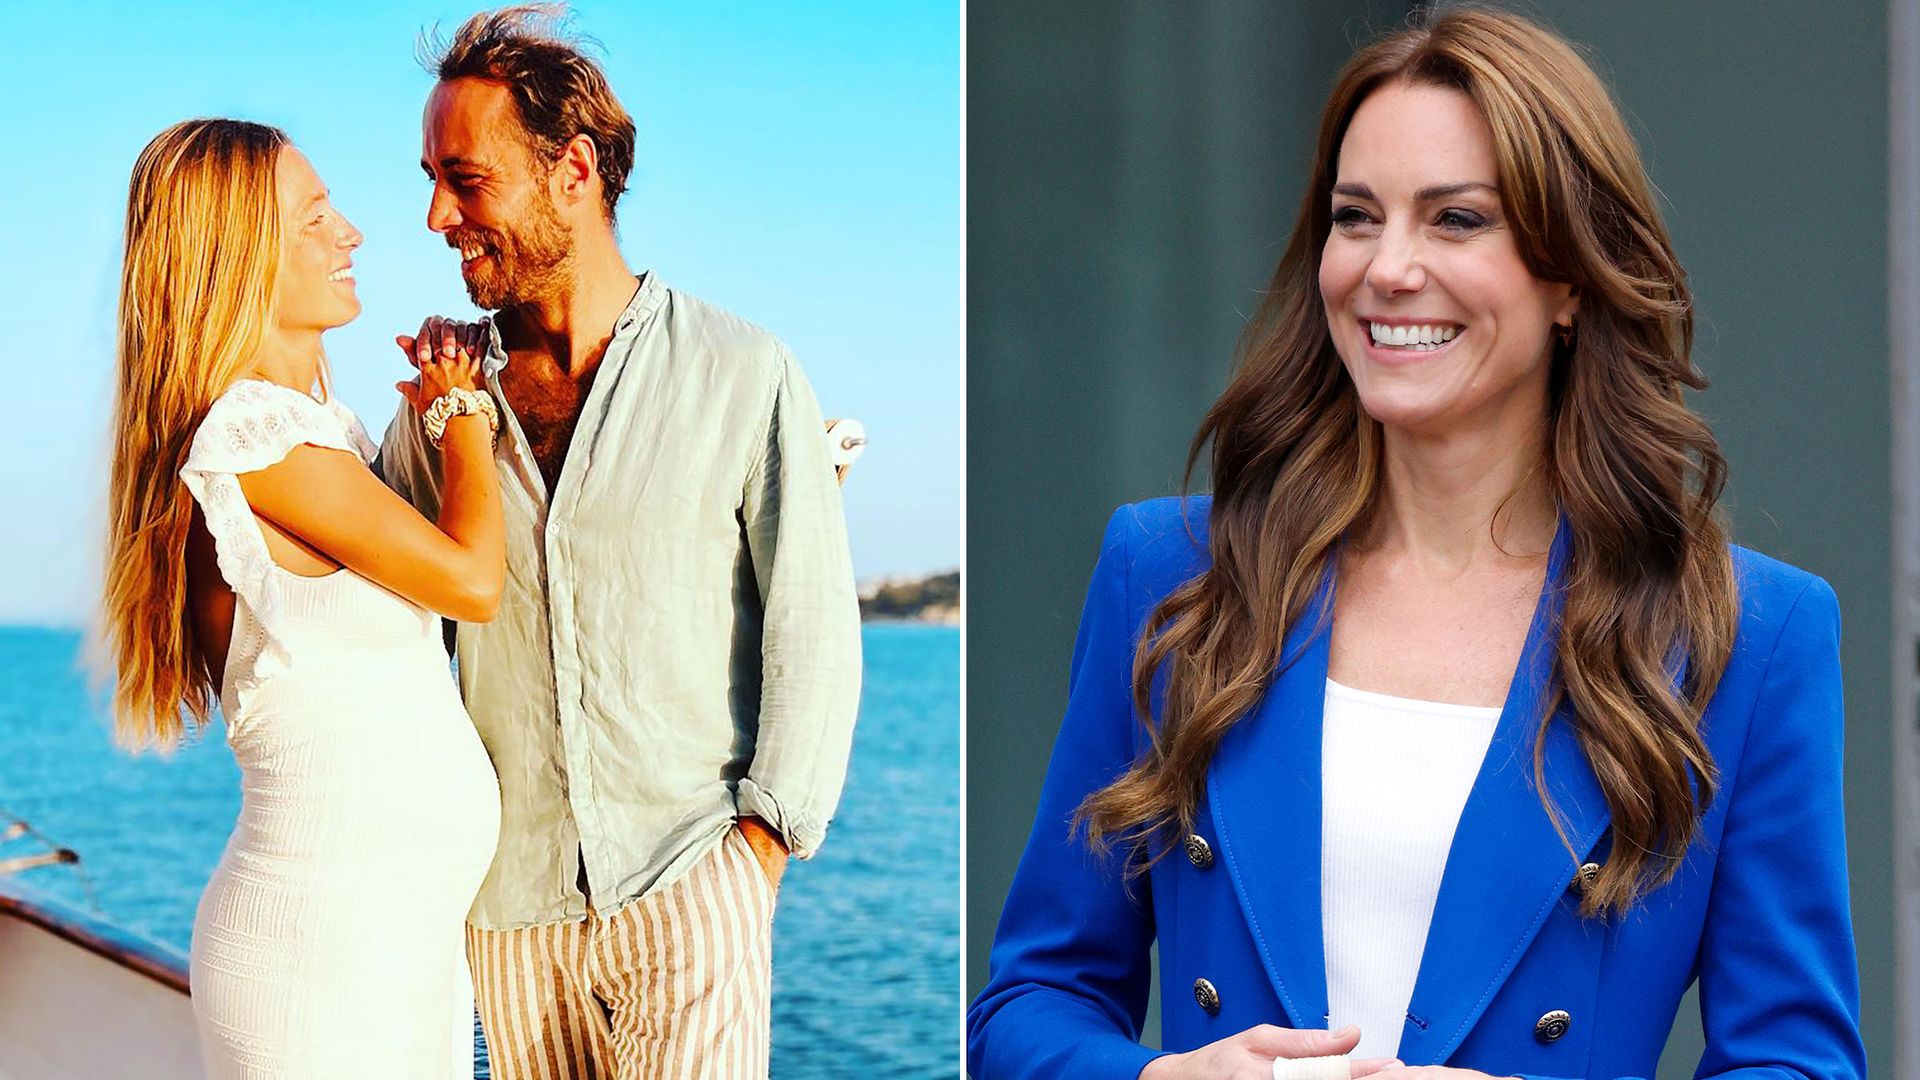 Kate Middleton's Brother James Middleton Welcomes First Child With Alizee Thevenet